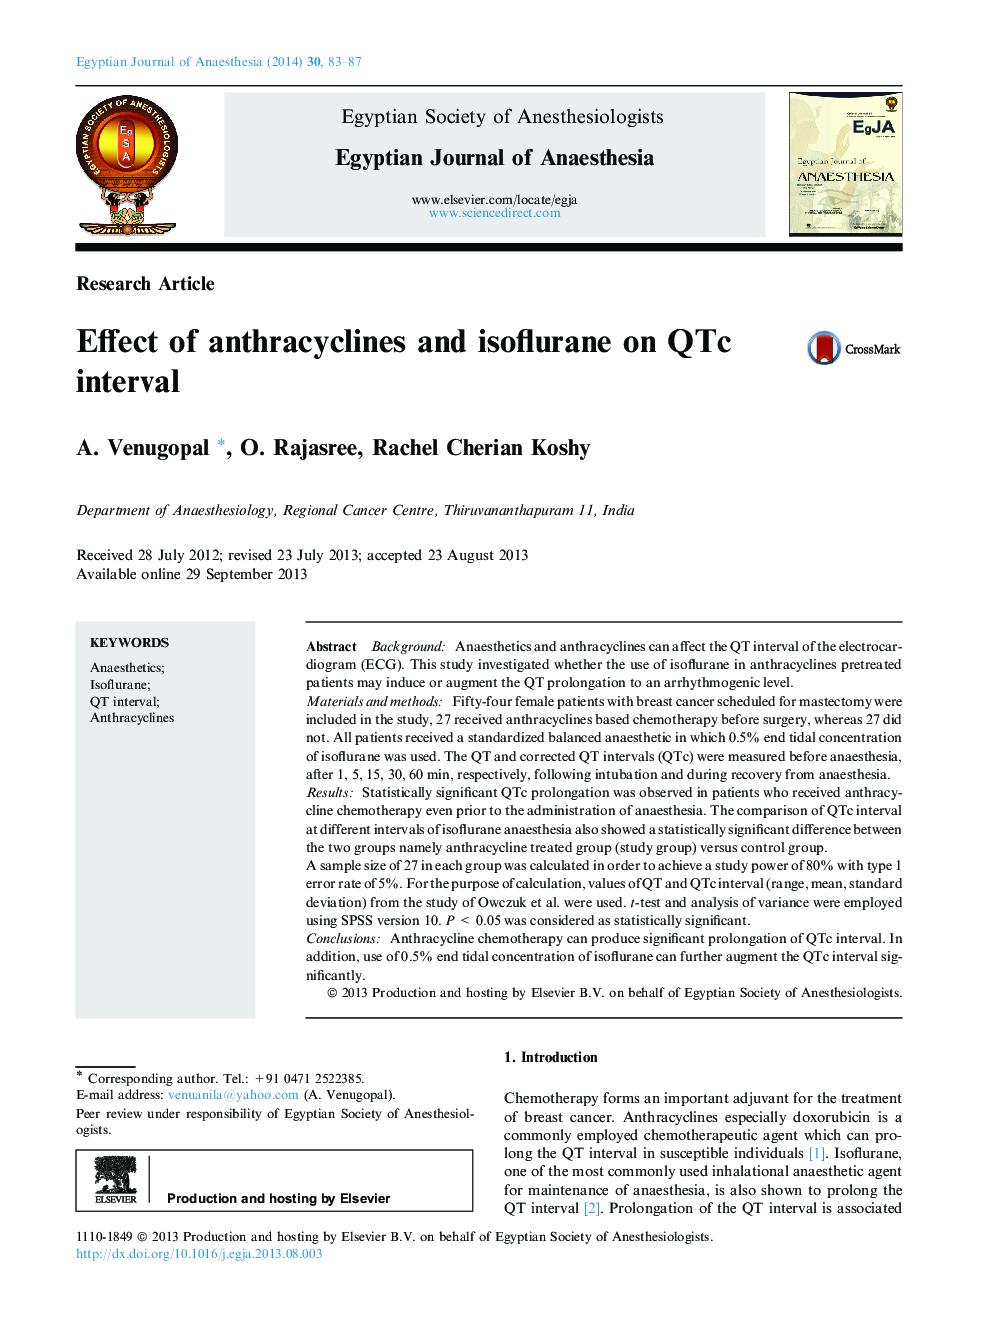 Effect of anthracyclines and isoflurane on QTc interval 